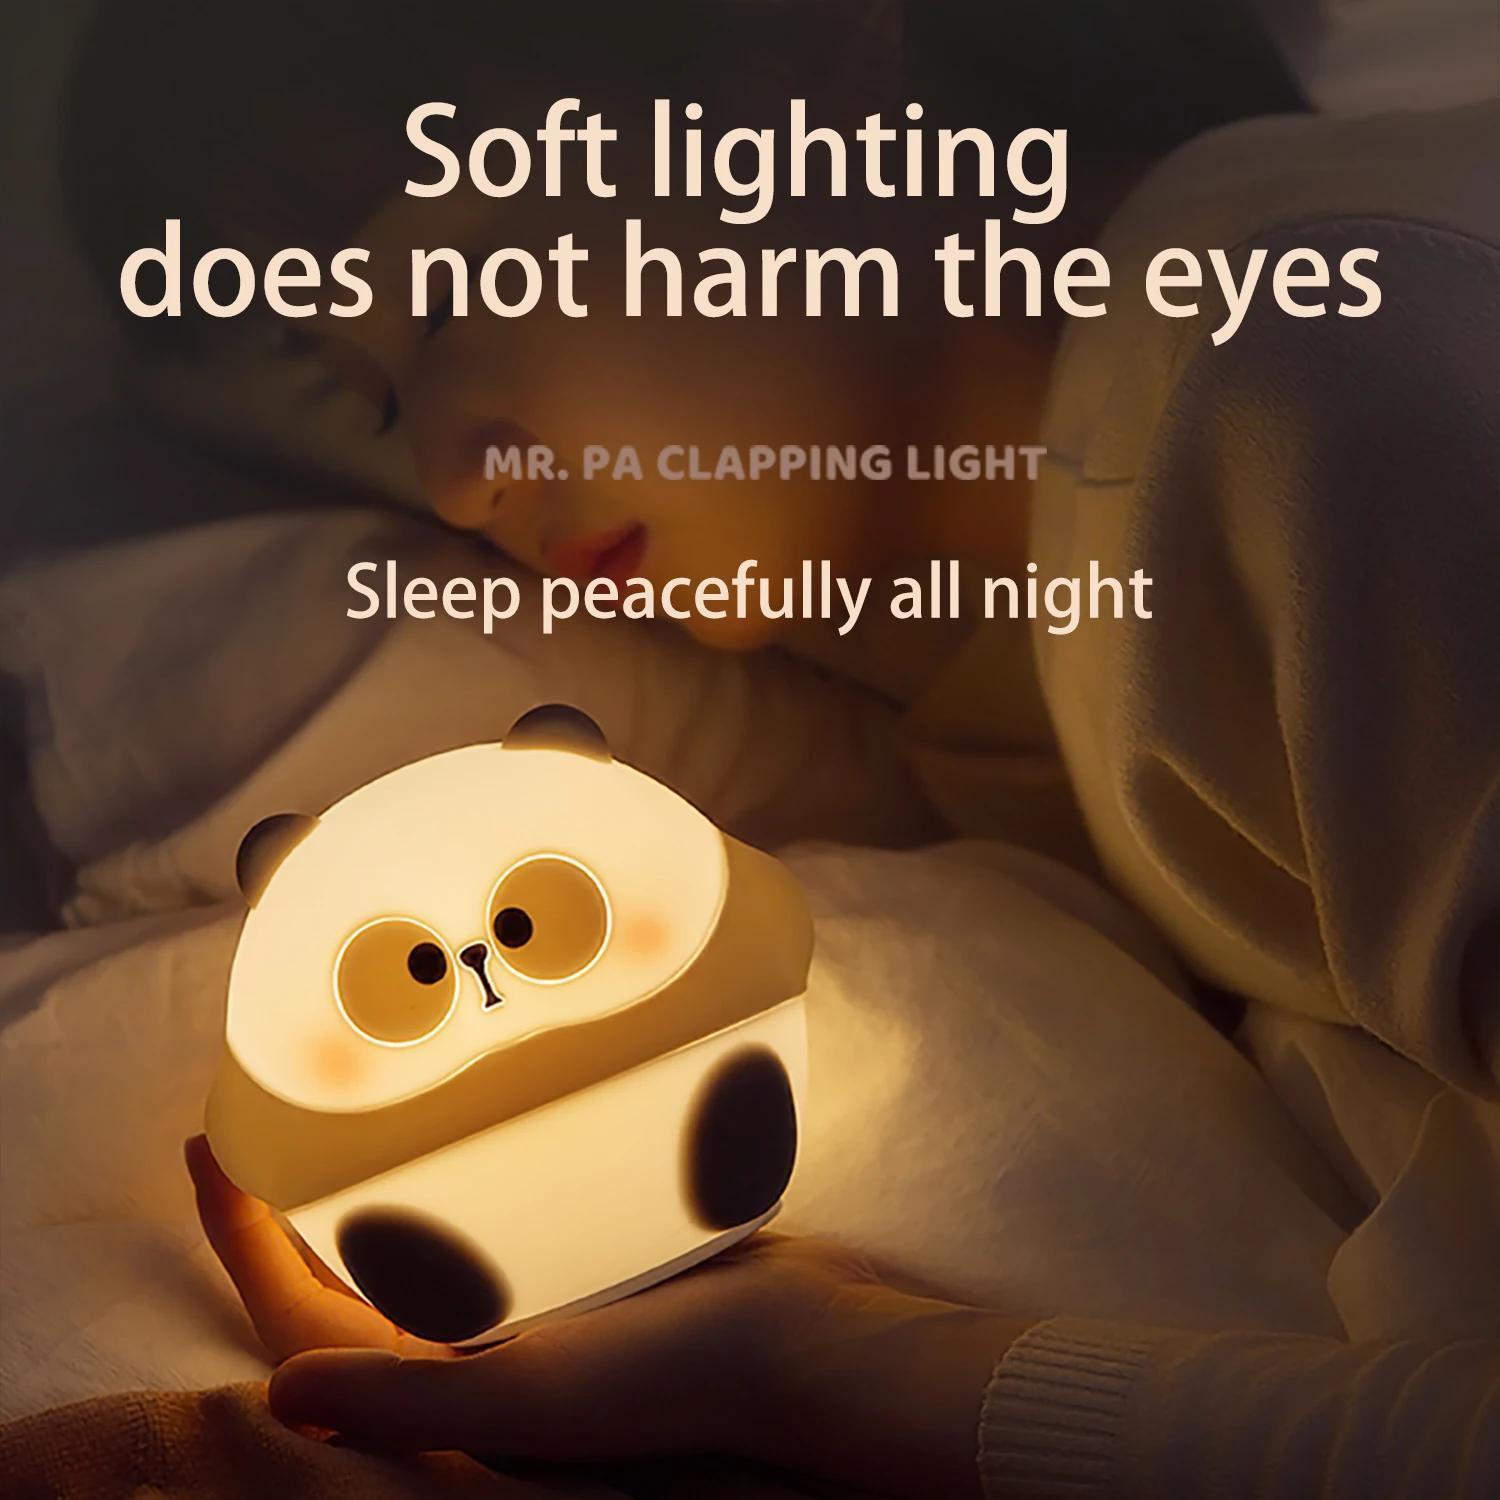 1pc LED Night Light, Cute Panda Cartoon Animals Silicone Lamp, USB Rechargeable Timing Sleeping Lamp, Creative Bedroom Bedside Lamp, For Home Decoration Festival/Birthday Gifts details 3